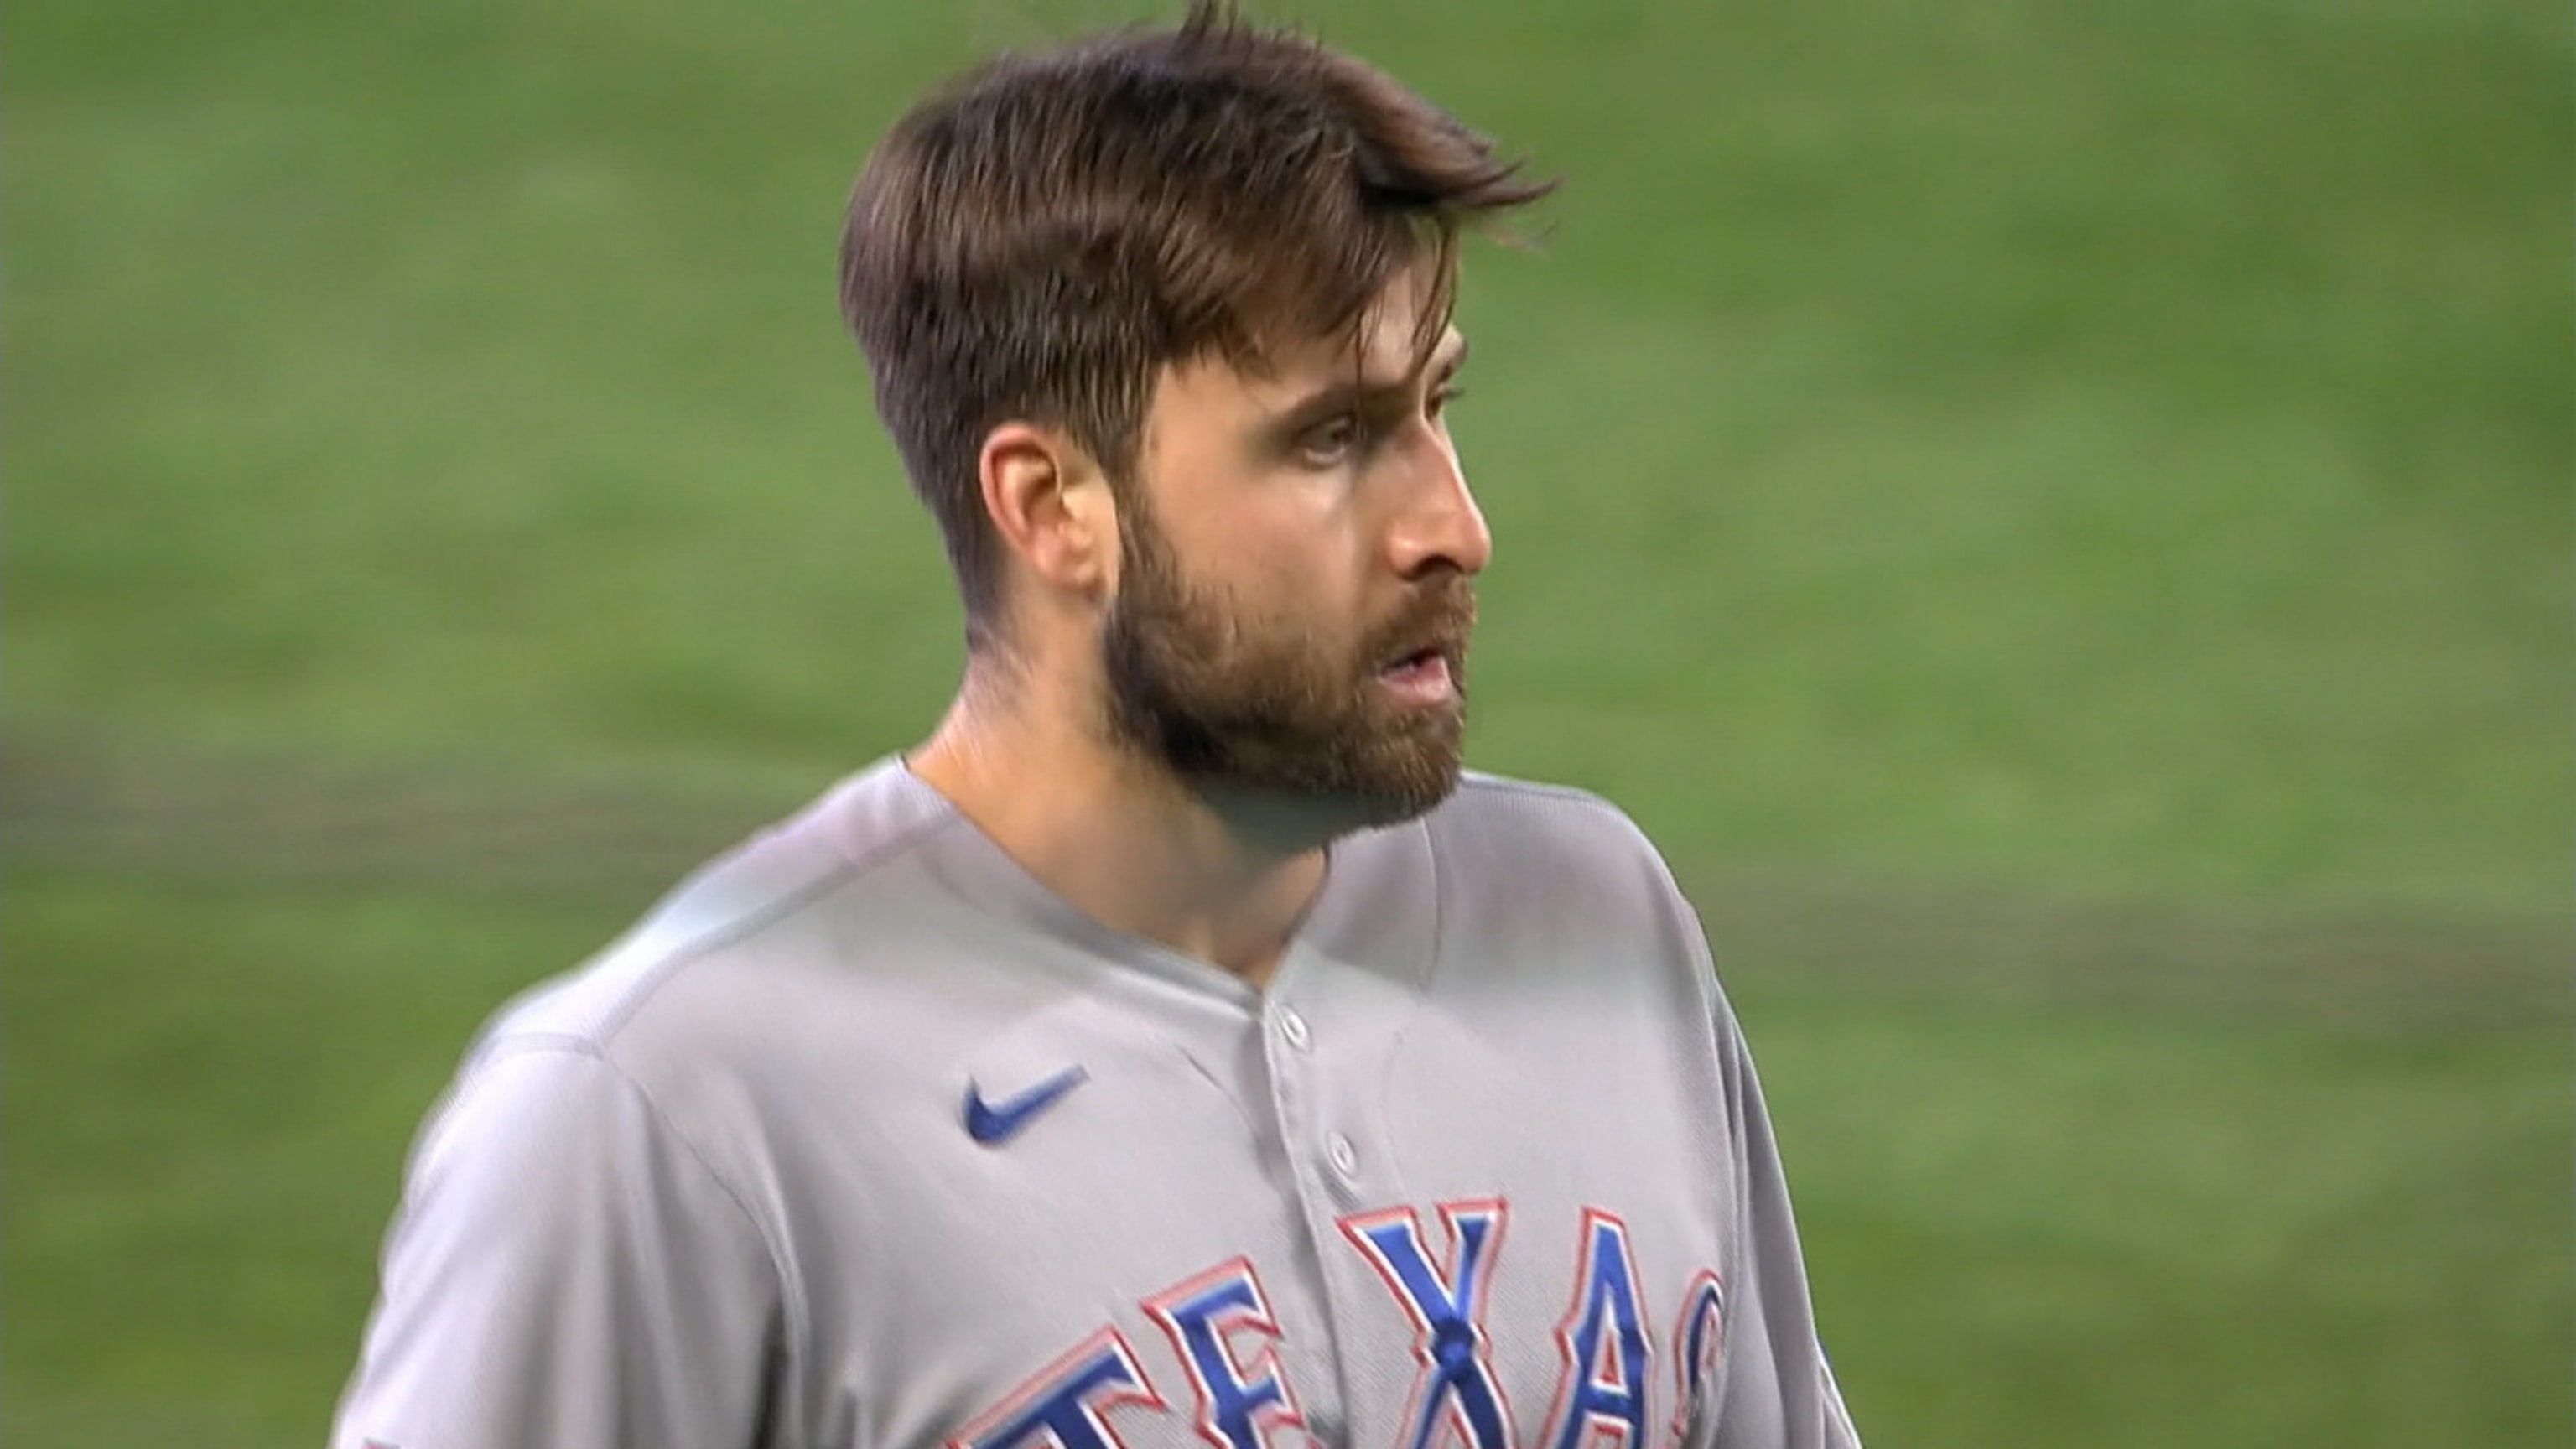 Yankees-Rangers Joey Gallo trade: Scouting report on slugging